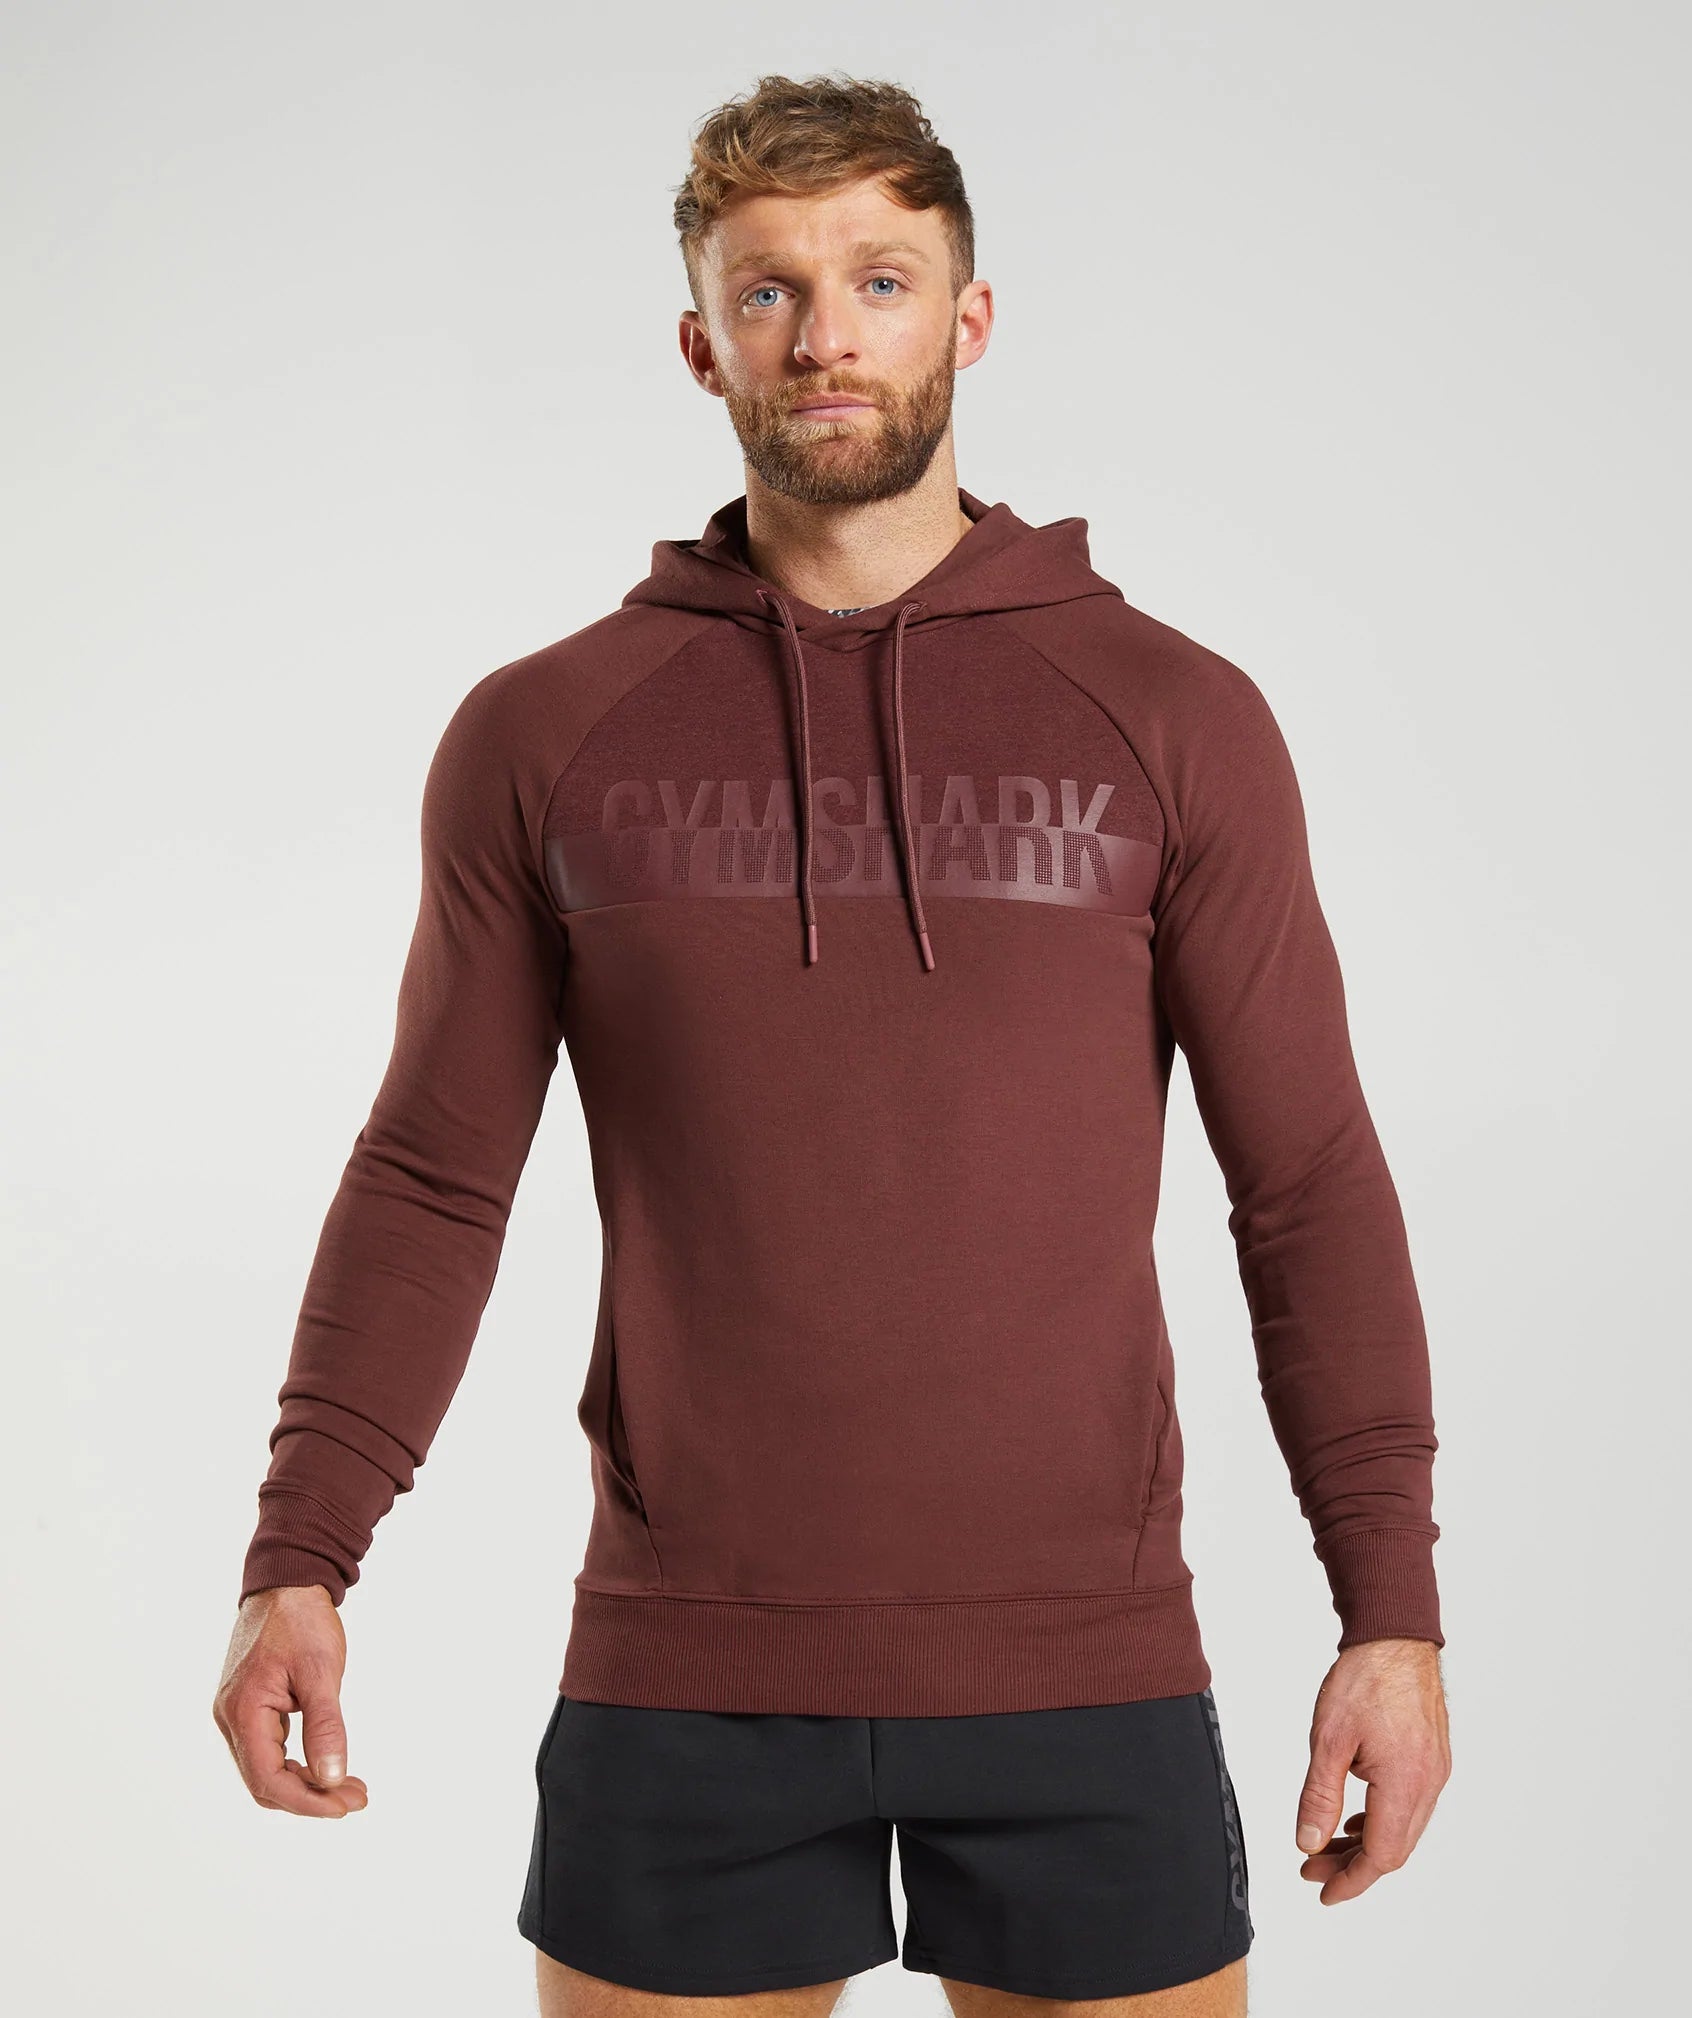 Bold React Hoodie in Cherry Brown - view 1